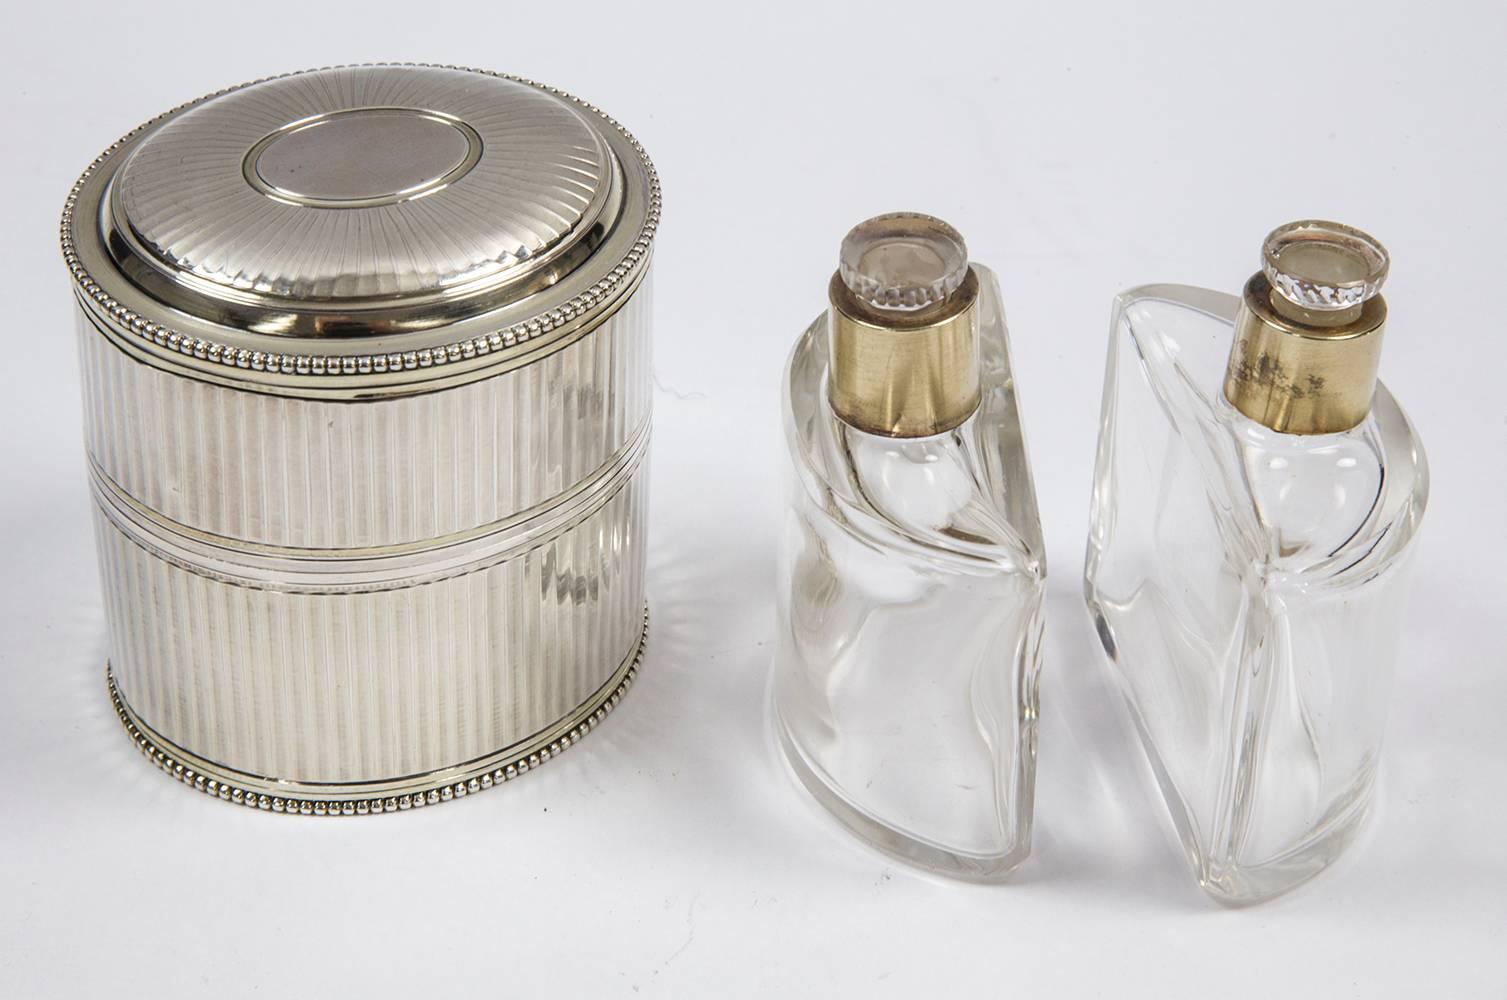 Antique French sterling silver oval shaped perfume bottle holder set, complete including two empty fitted demilune glass bottles with fitted sterling silver collars and stoppers. Approximately size: 2.75” x 2.5” x 3” high.
     